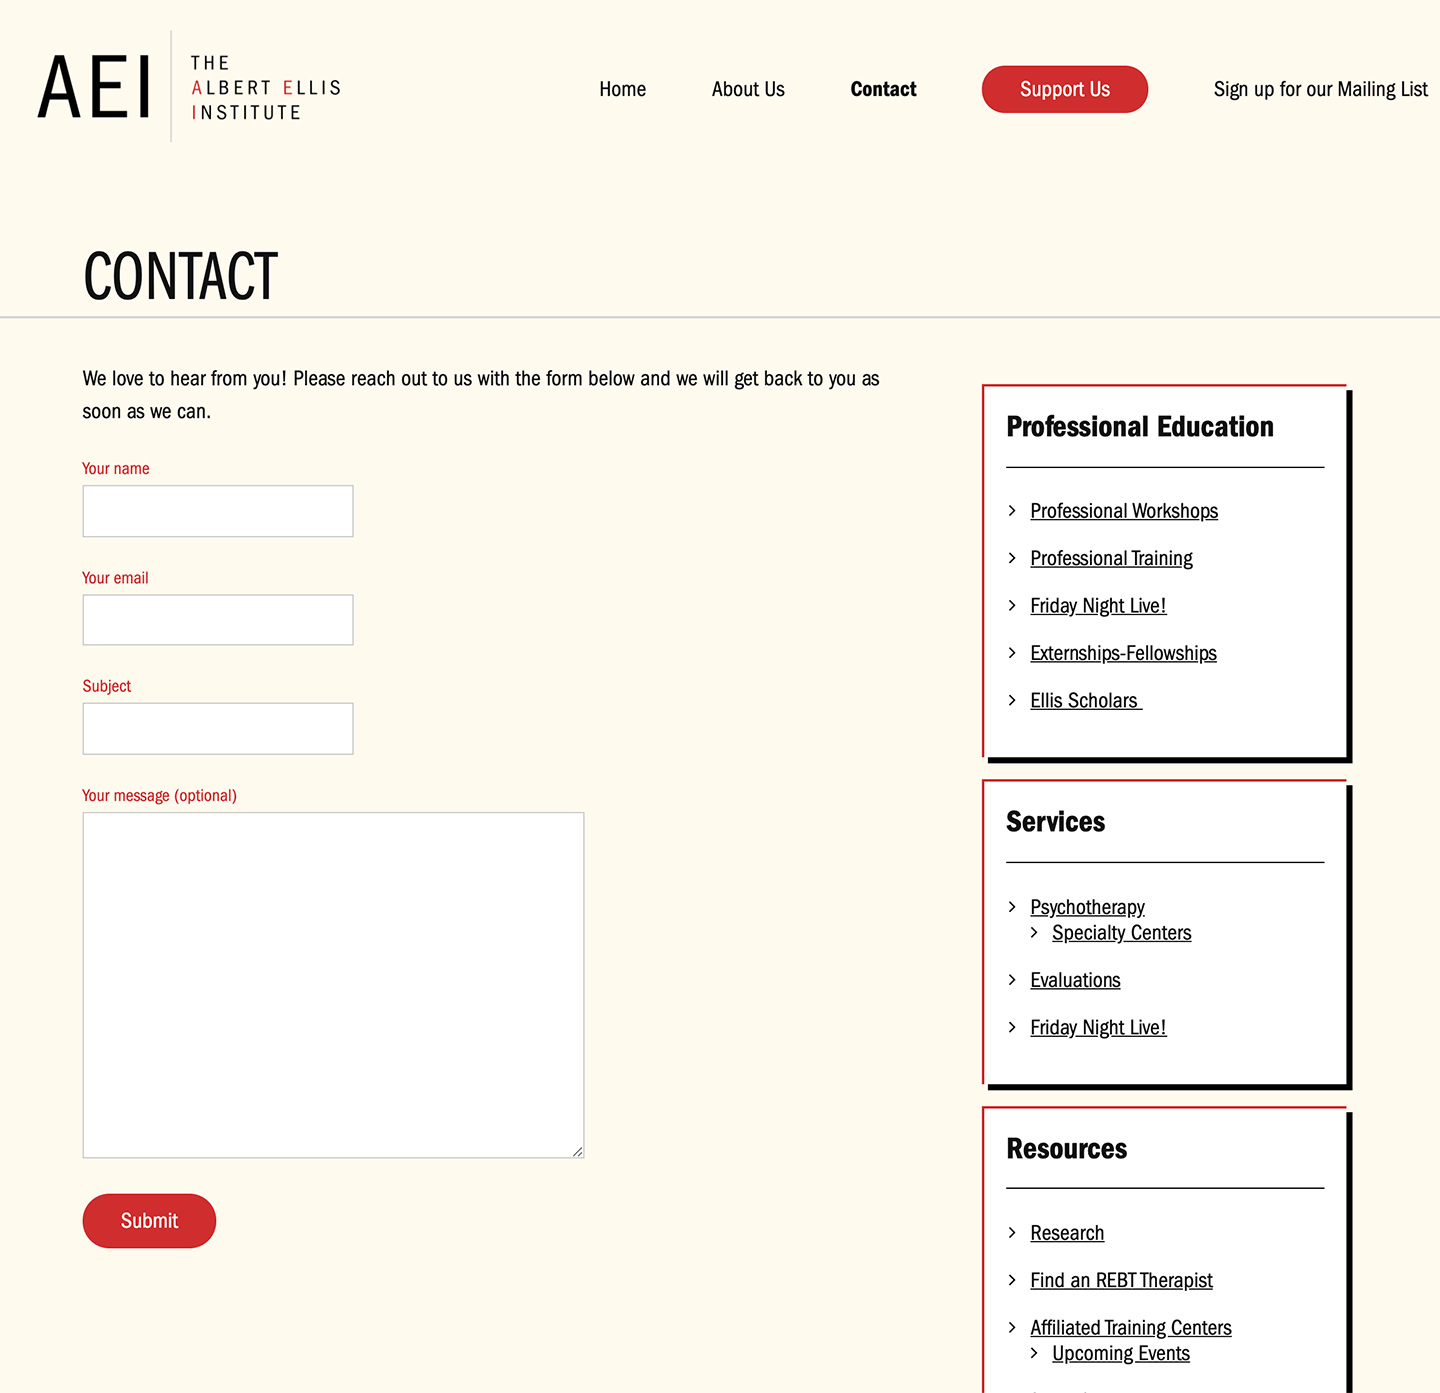 Albert Ellis Institute: Albert Ellis Institute - Contact Forms